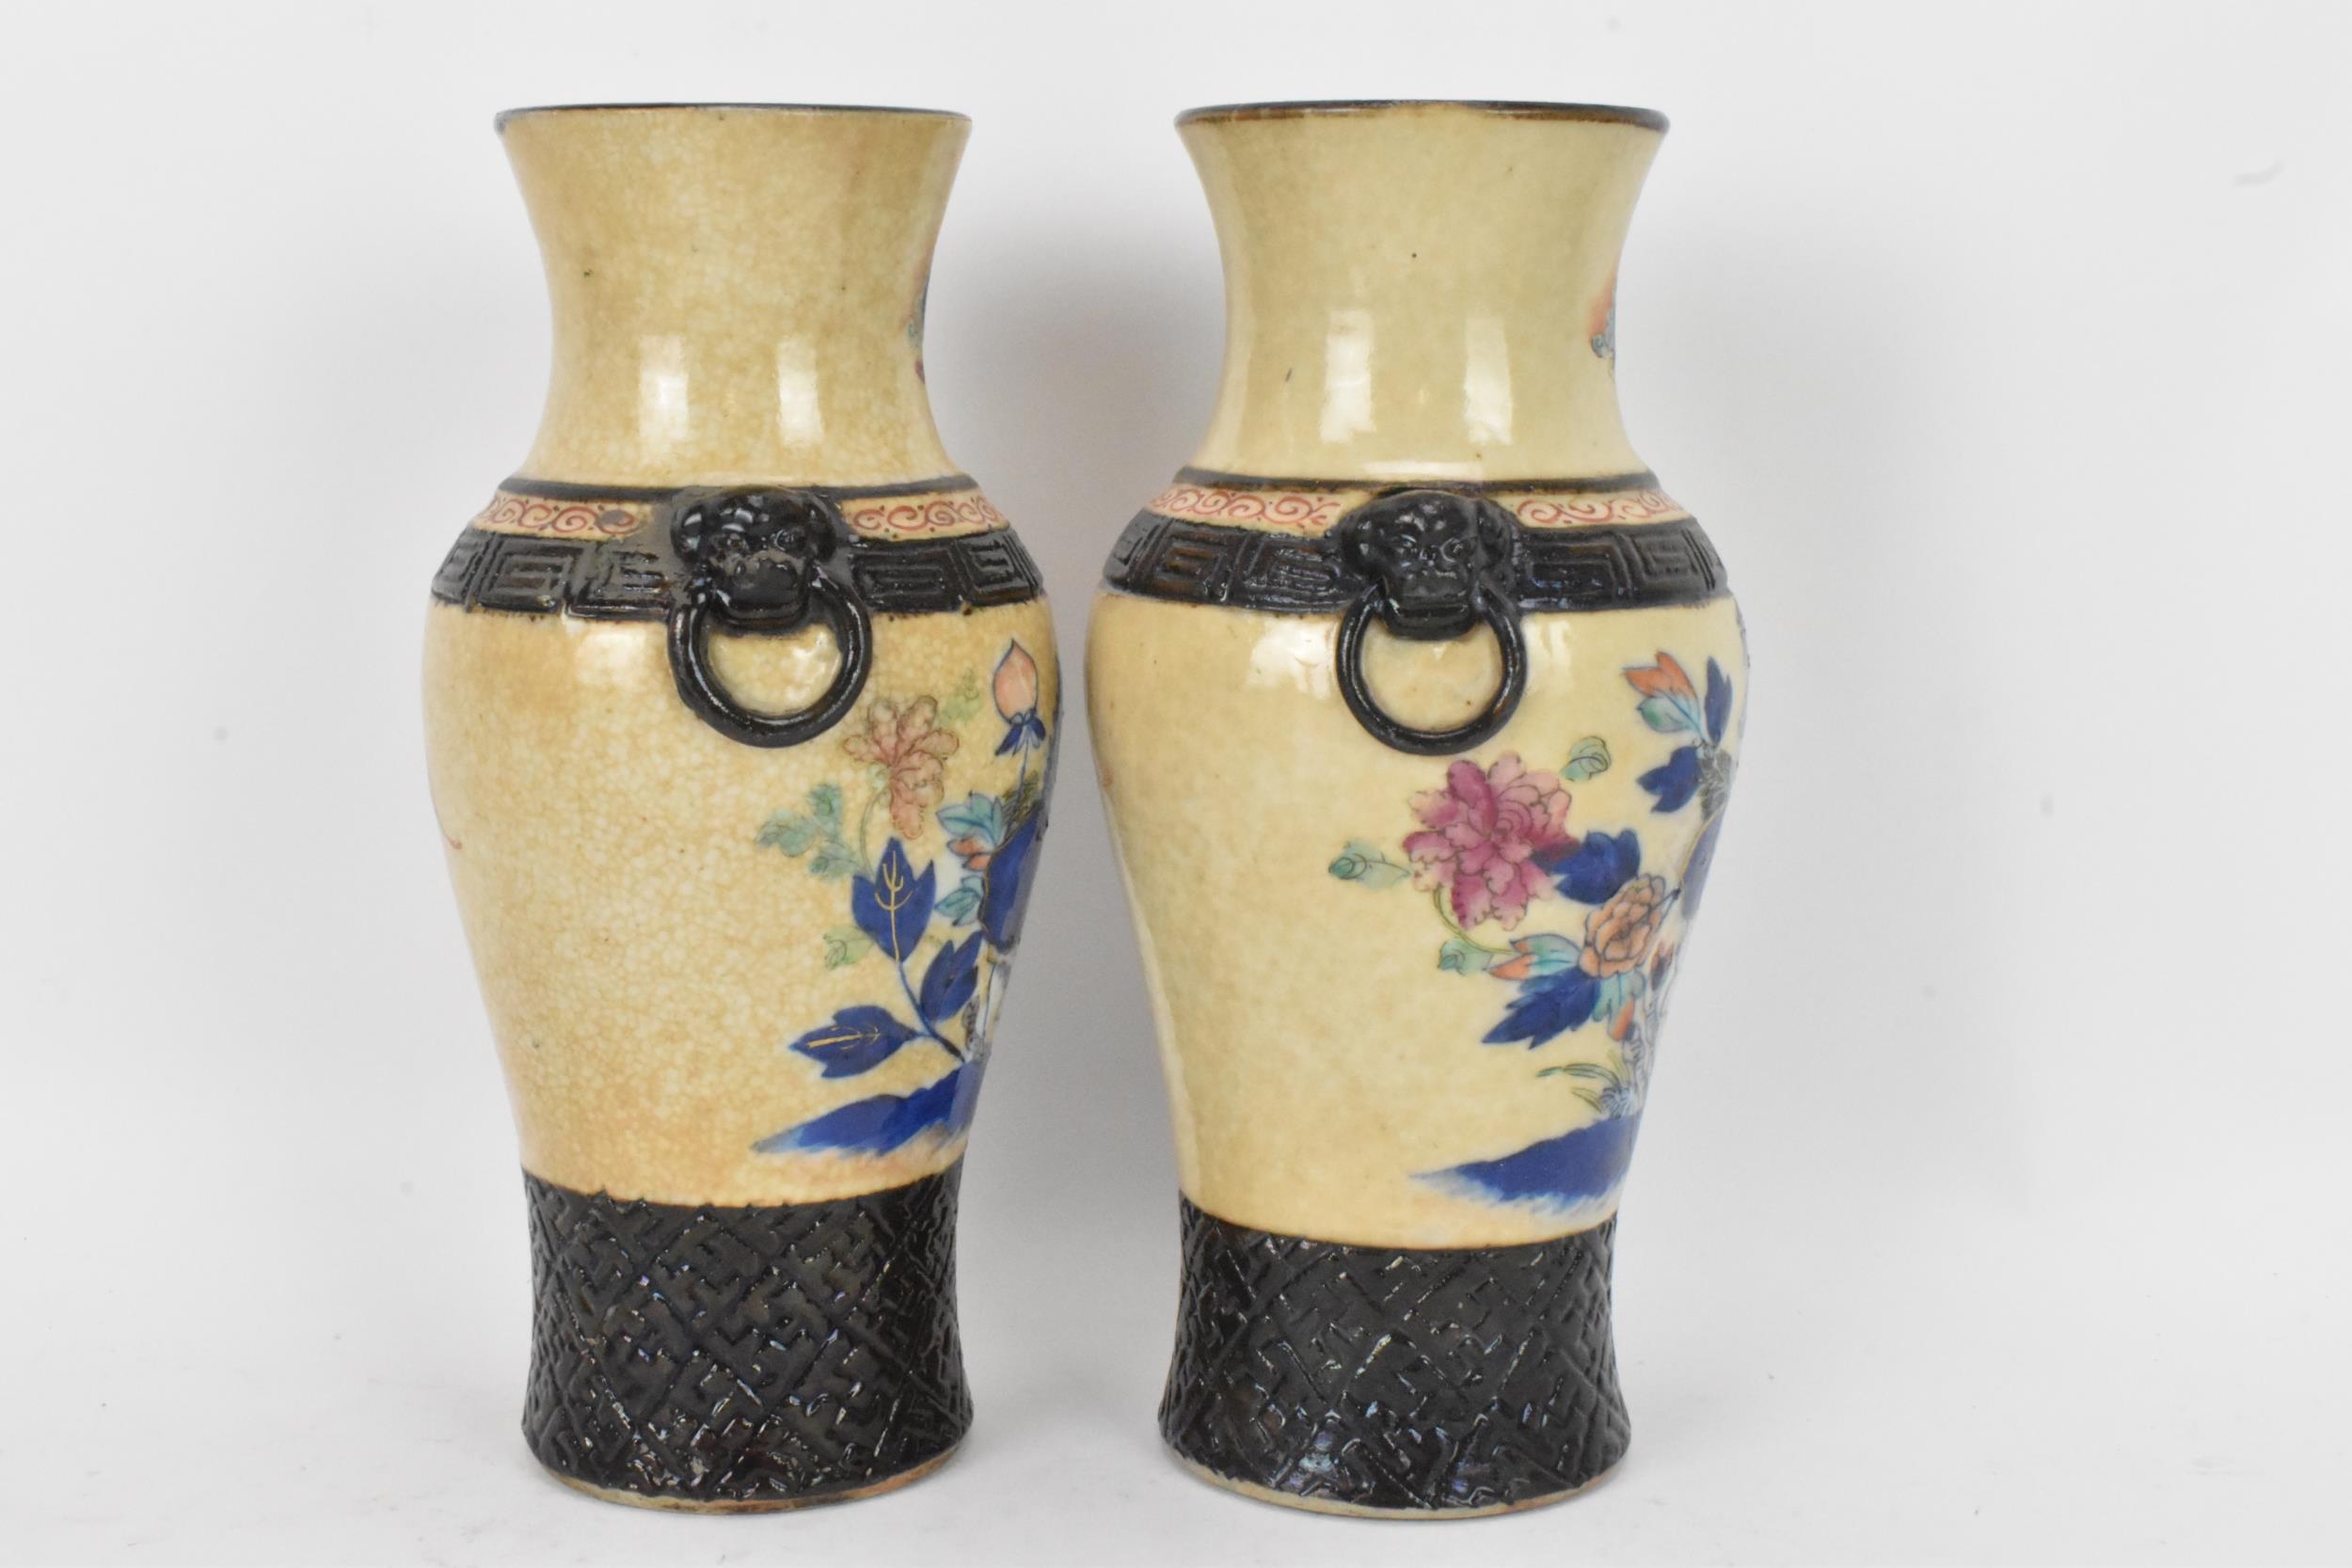 A pair of Chinese Nanking crackle glazed vases, Qing dynasty, late 19th century, baluster form - Image 4 of 7